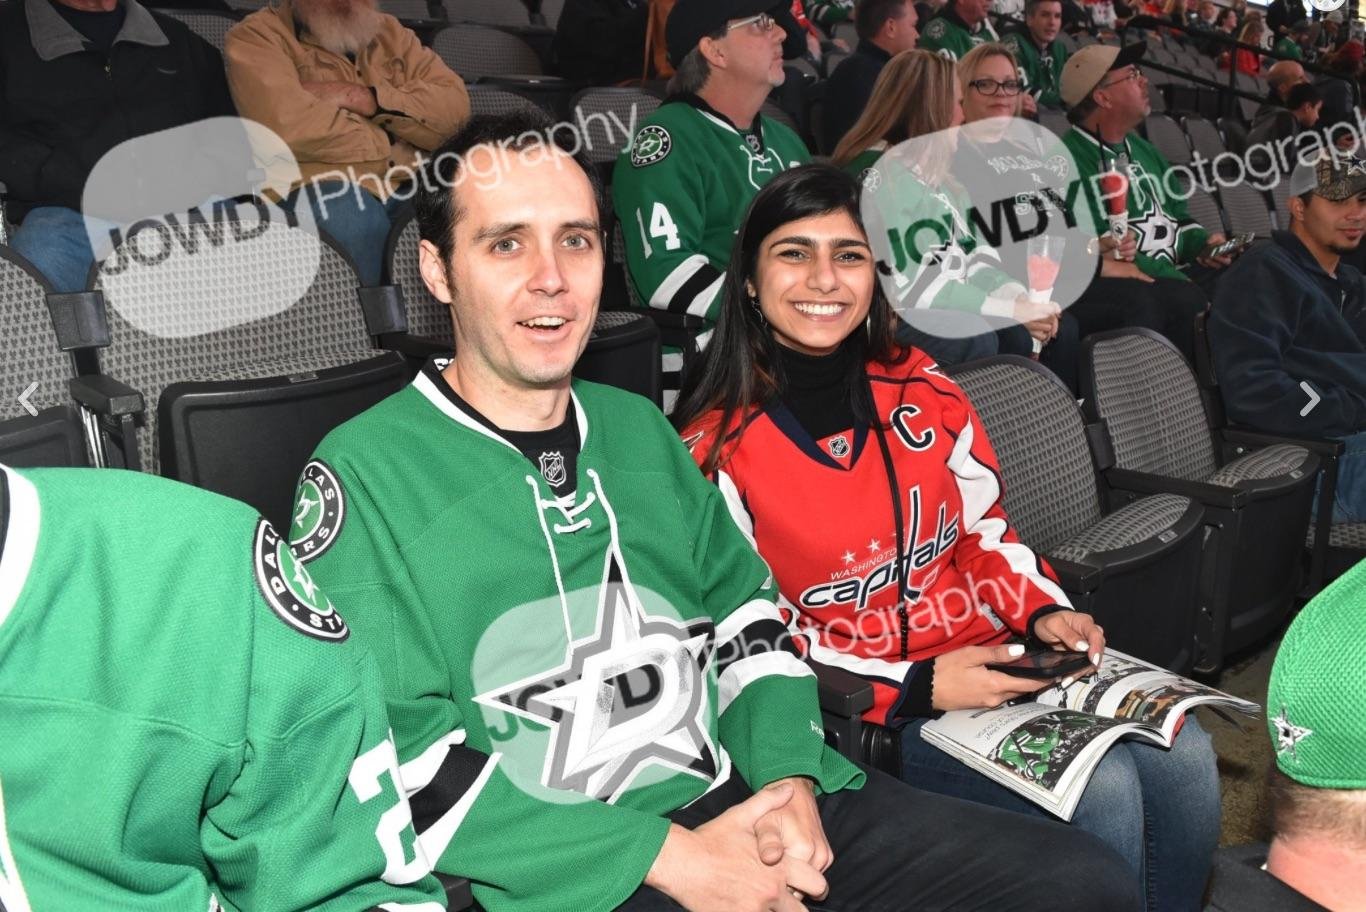 Randomly found Mia’s picture from a Dallas Stars game from last year through the fan photo website!